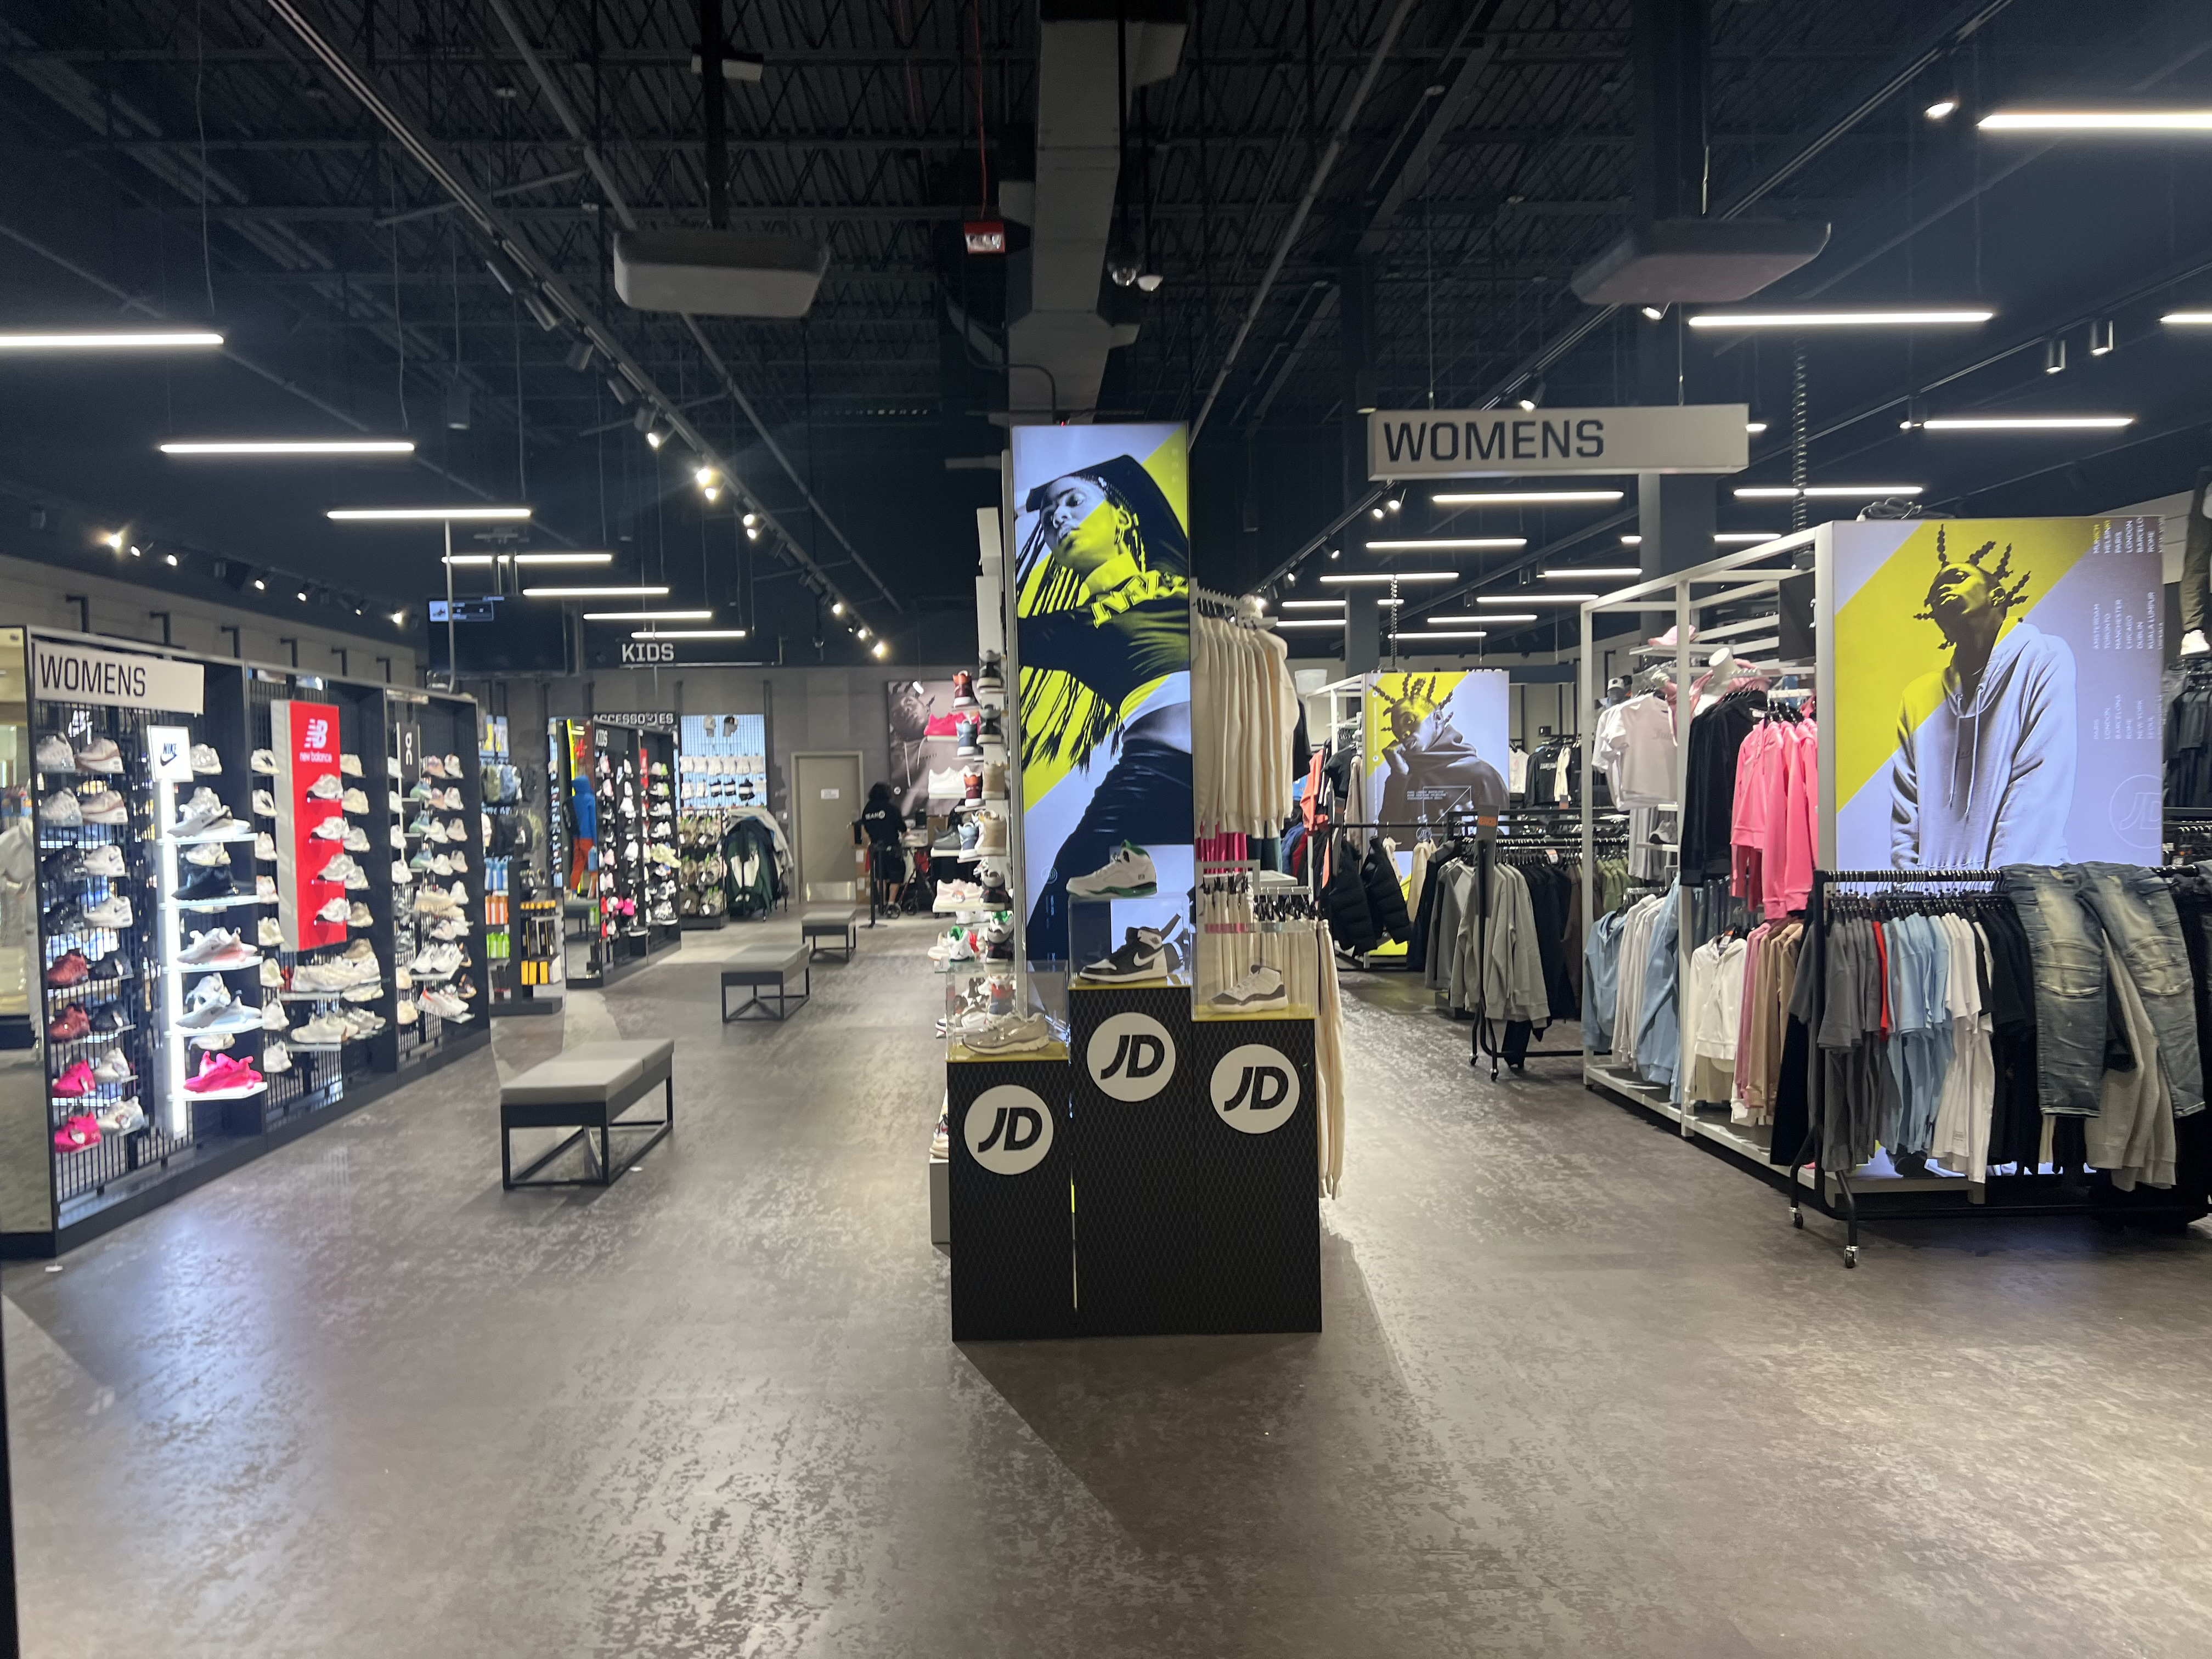 JD Sports photo inside the store